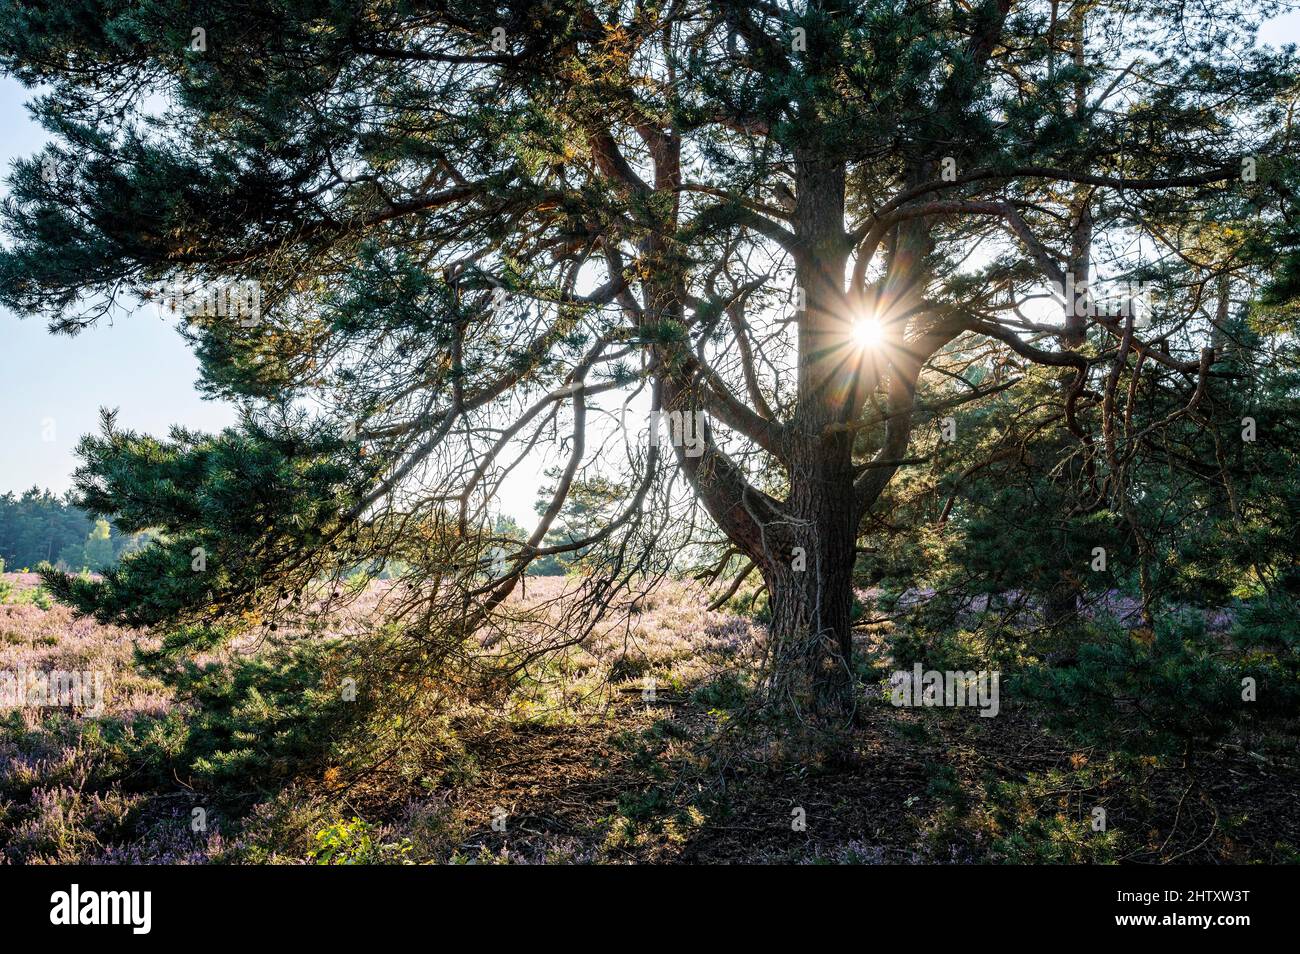 Old scots pine (Pinus sylvestris) in backlight with sunstar, in heath landscape, Wietzer Berg, Lower Saxony, Germany Stock Photo